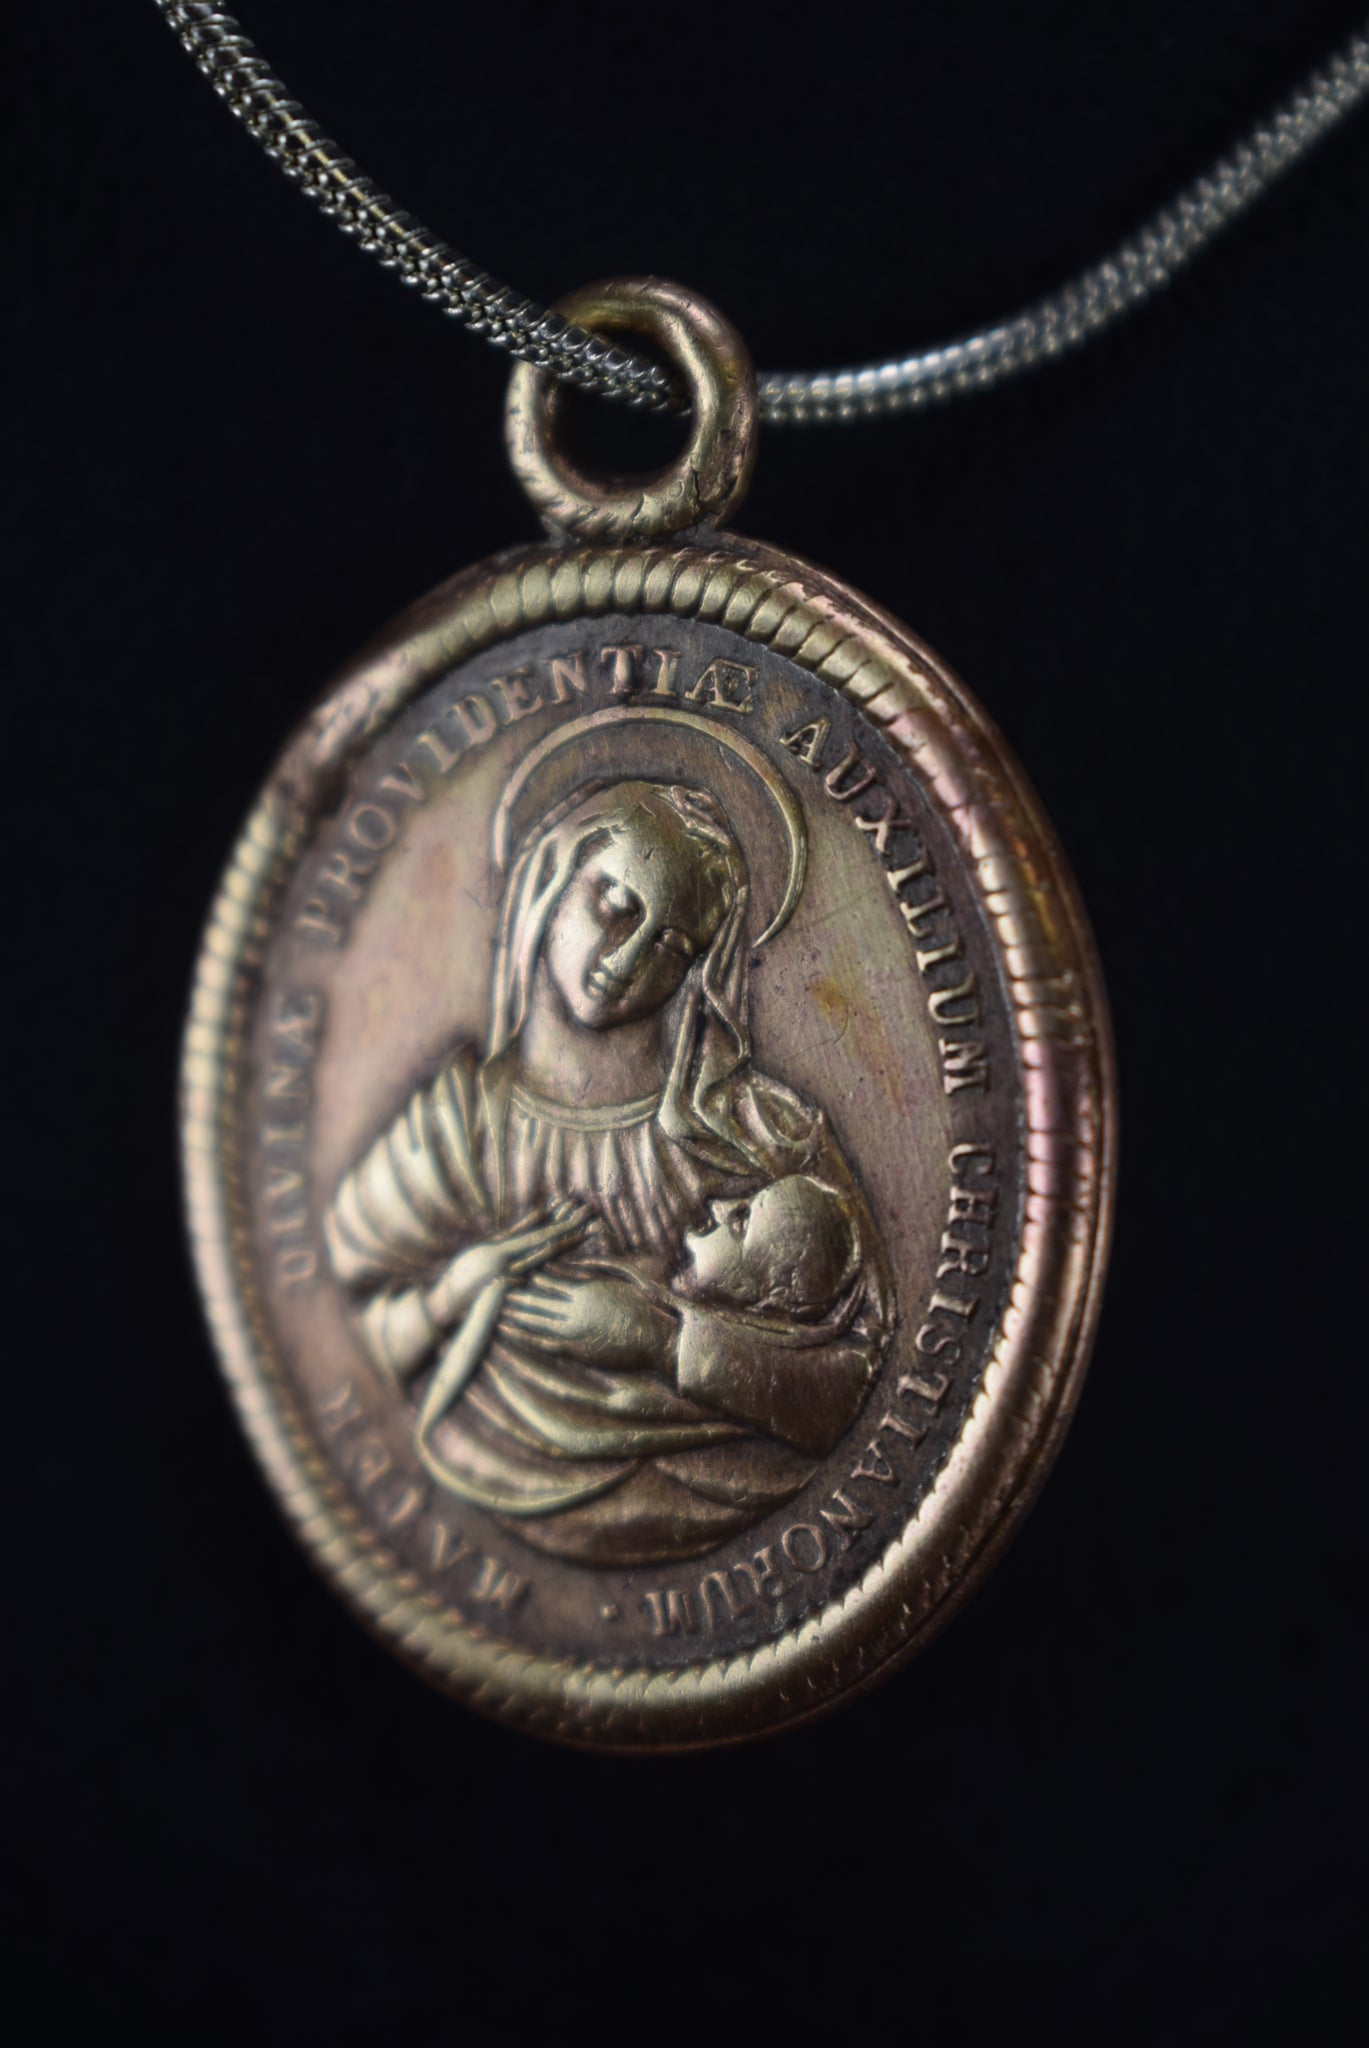 St Joseph & Our Lady of Divine Providence Medal - Charmantiques